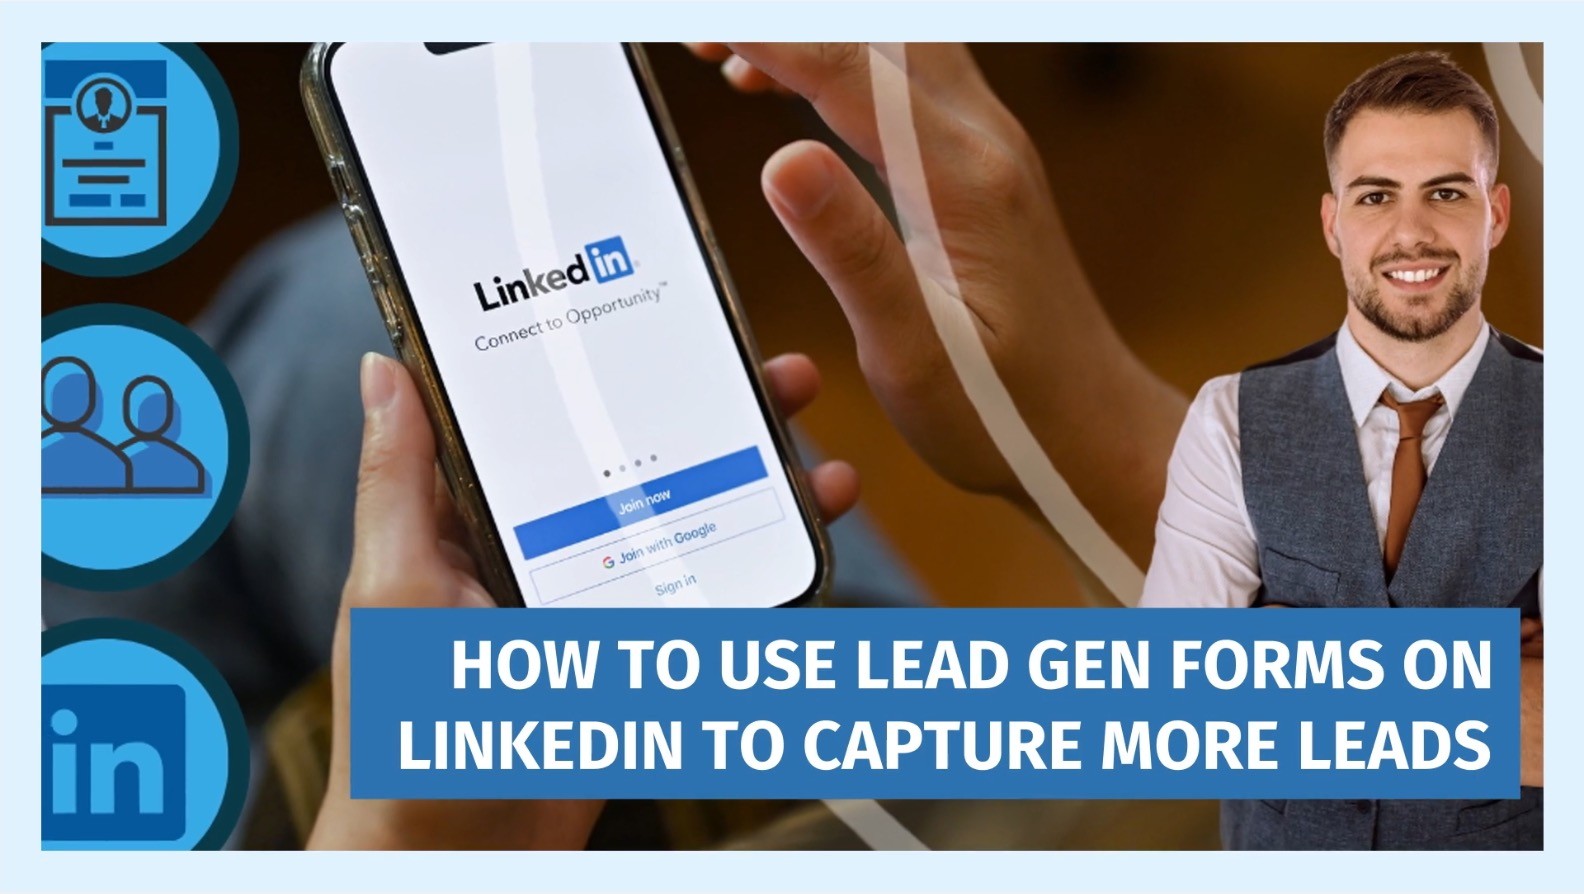 How to Use Lead Gen Forms on LinkedIn to Capture More Leads